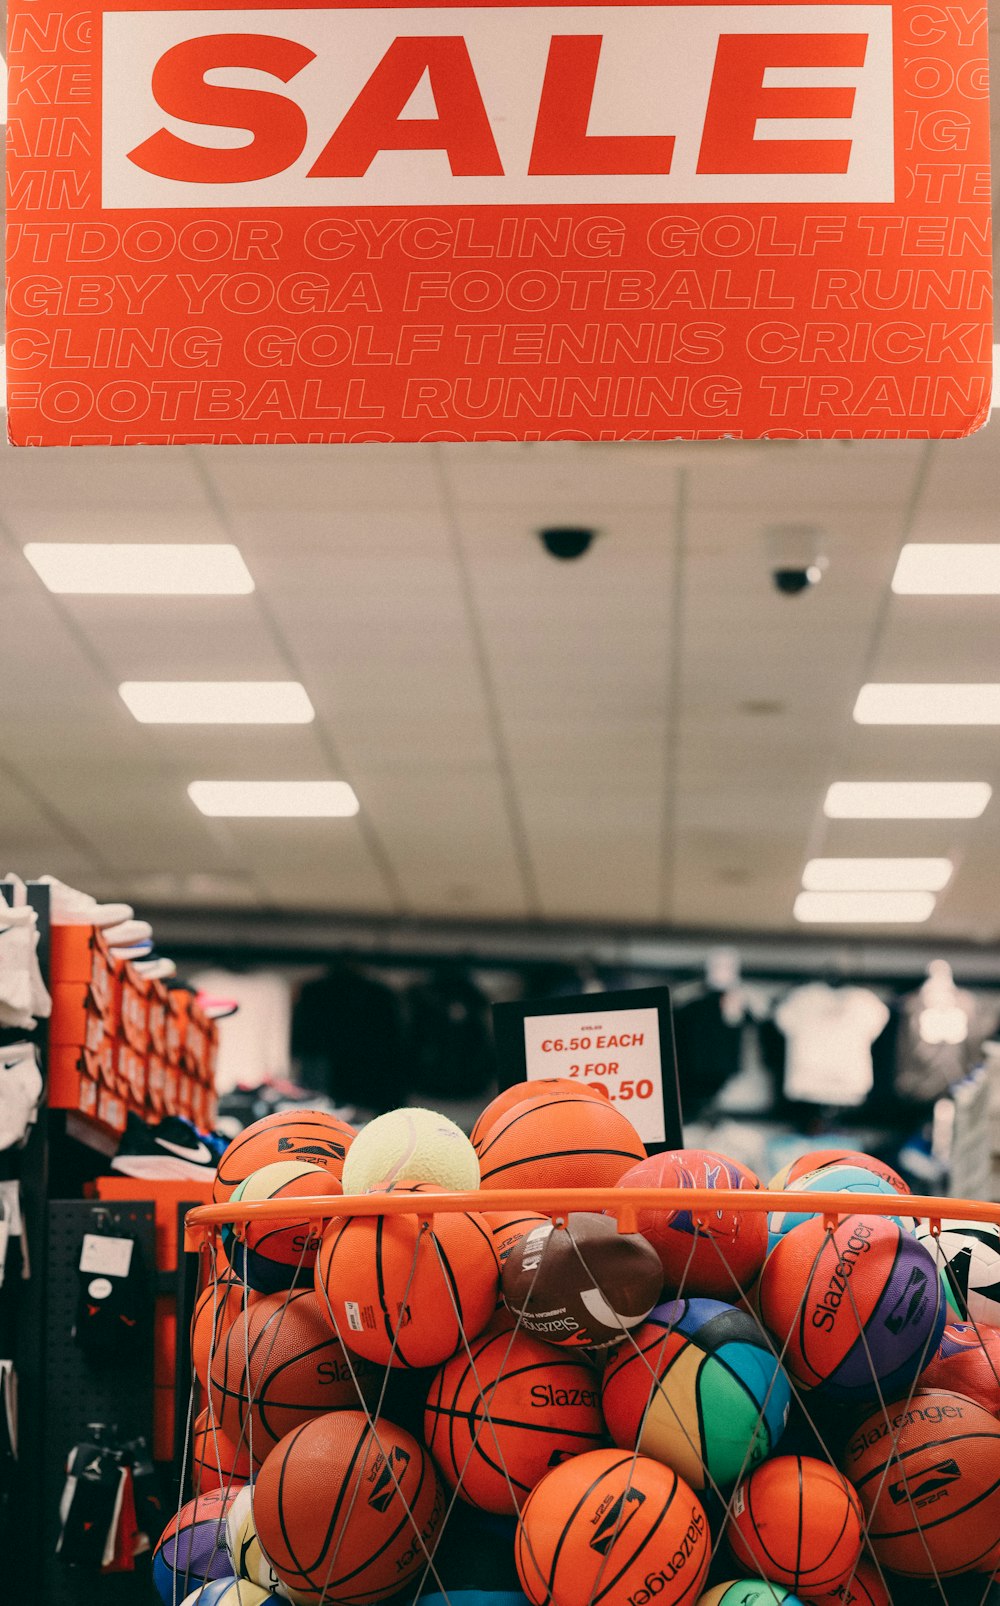 a basket full of basketballs for sale in a store